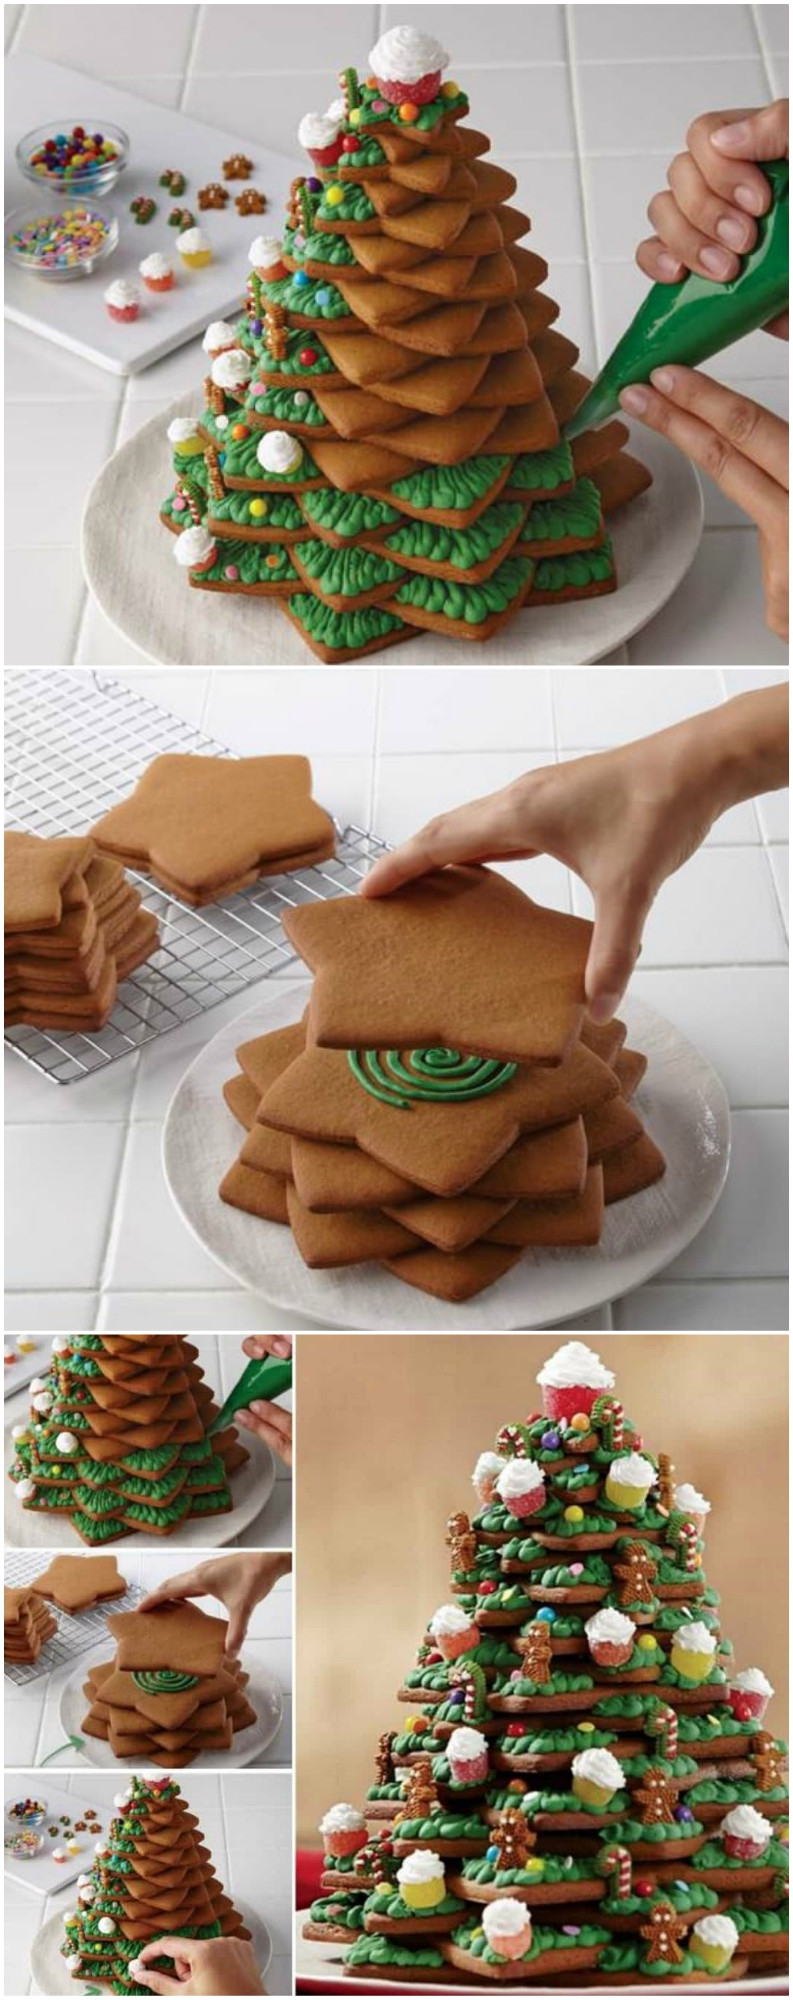 3D Christmas Tree Cookies
 3D Cookie Christmas Tree Recipe With Video Tutorial